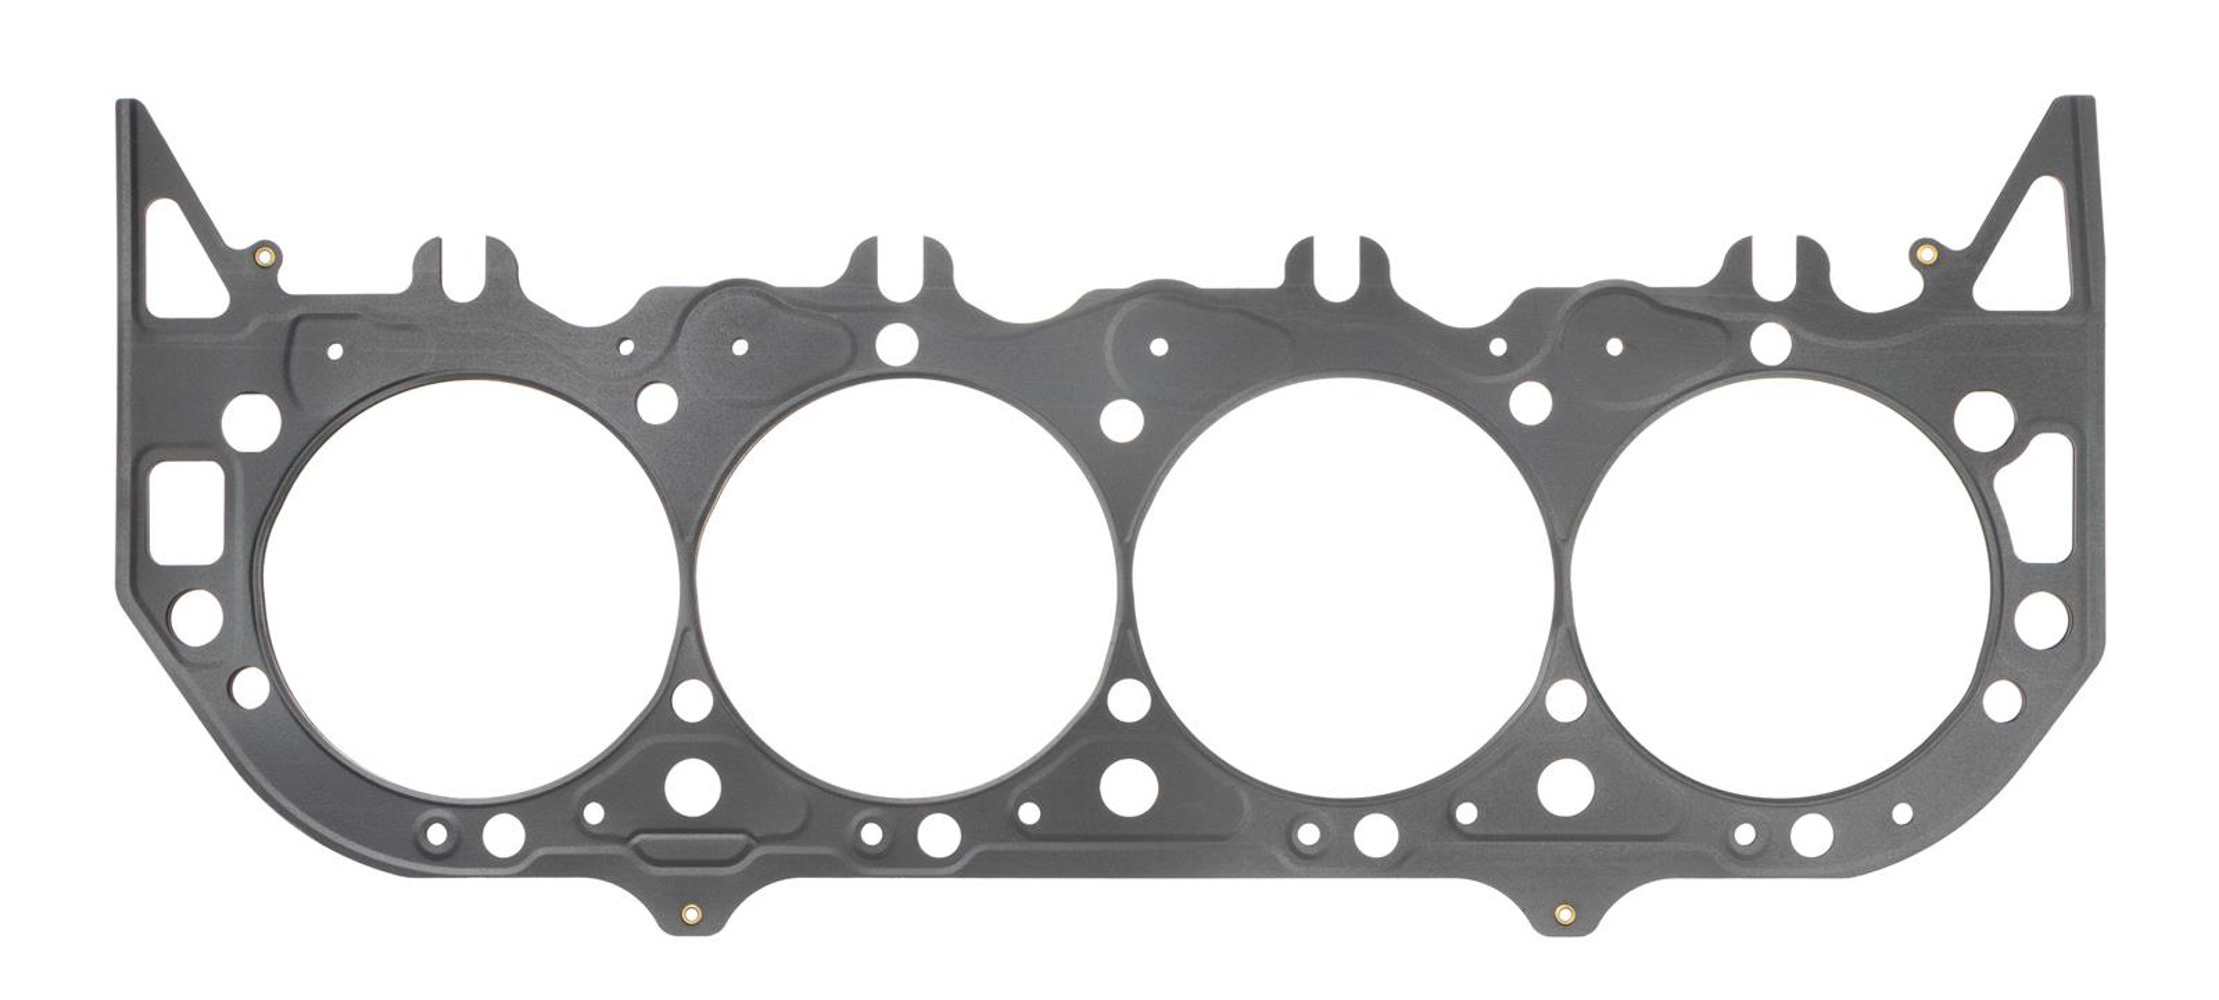 SCE Gaskets M135439 - Cylinder Head Gasket, MLS Spartan, 4.540 in Bore, 0.039 in Compression Thickness, Multi-Layer Steel, Big Block Chevy, Each